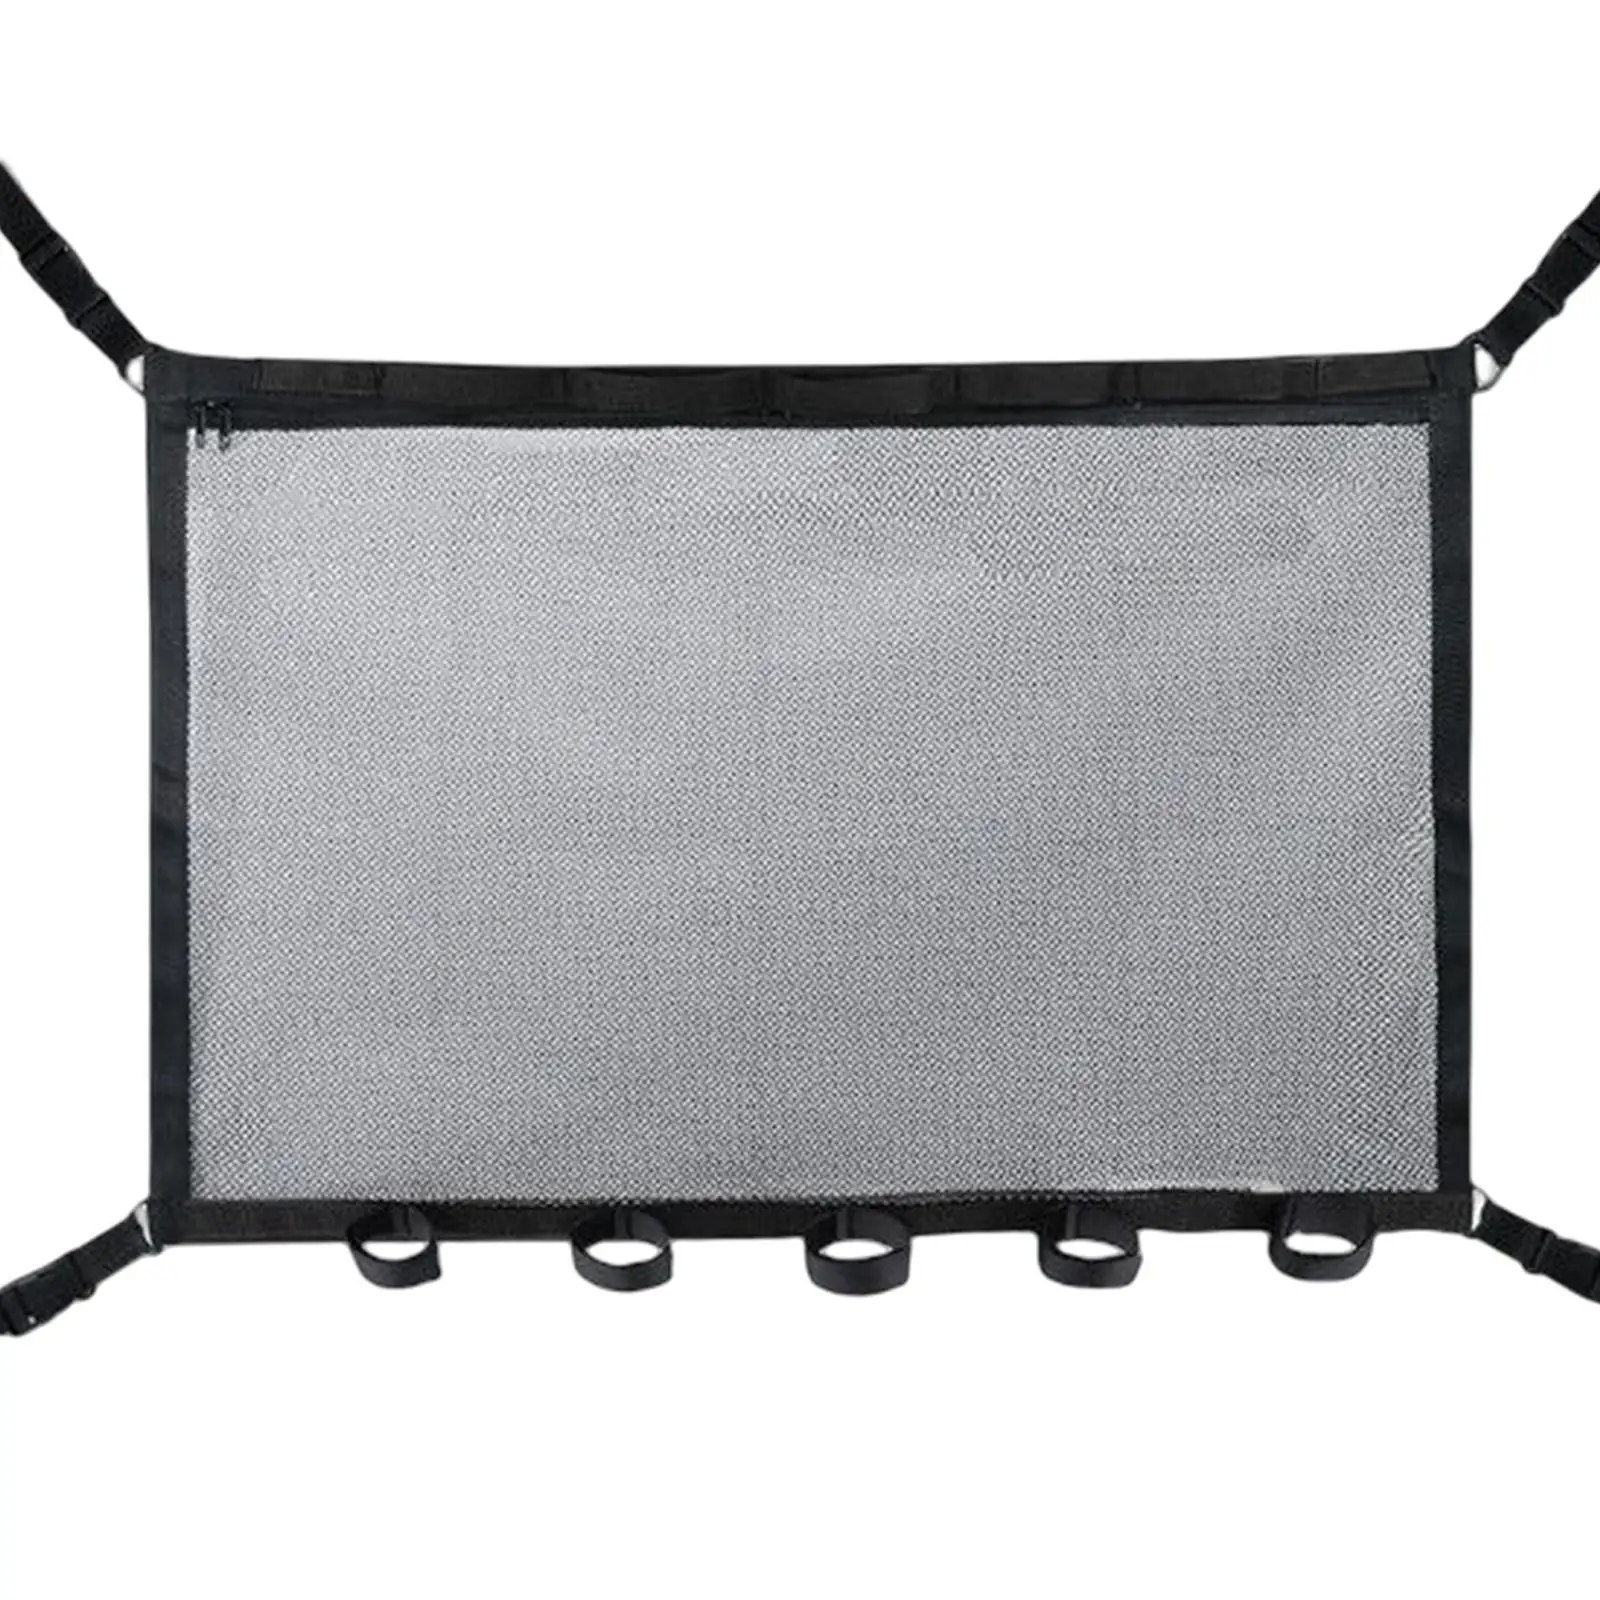 Portable Car Ceiling Storage Net Rod Holder Adjustable Double Layer Mesh Car Roof Organizer for Truck Travel Tent Blanket Toys